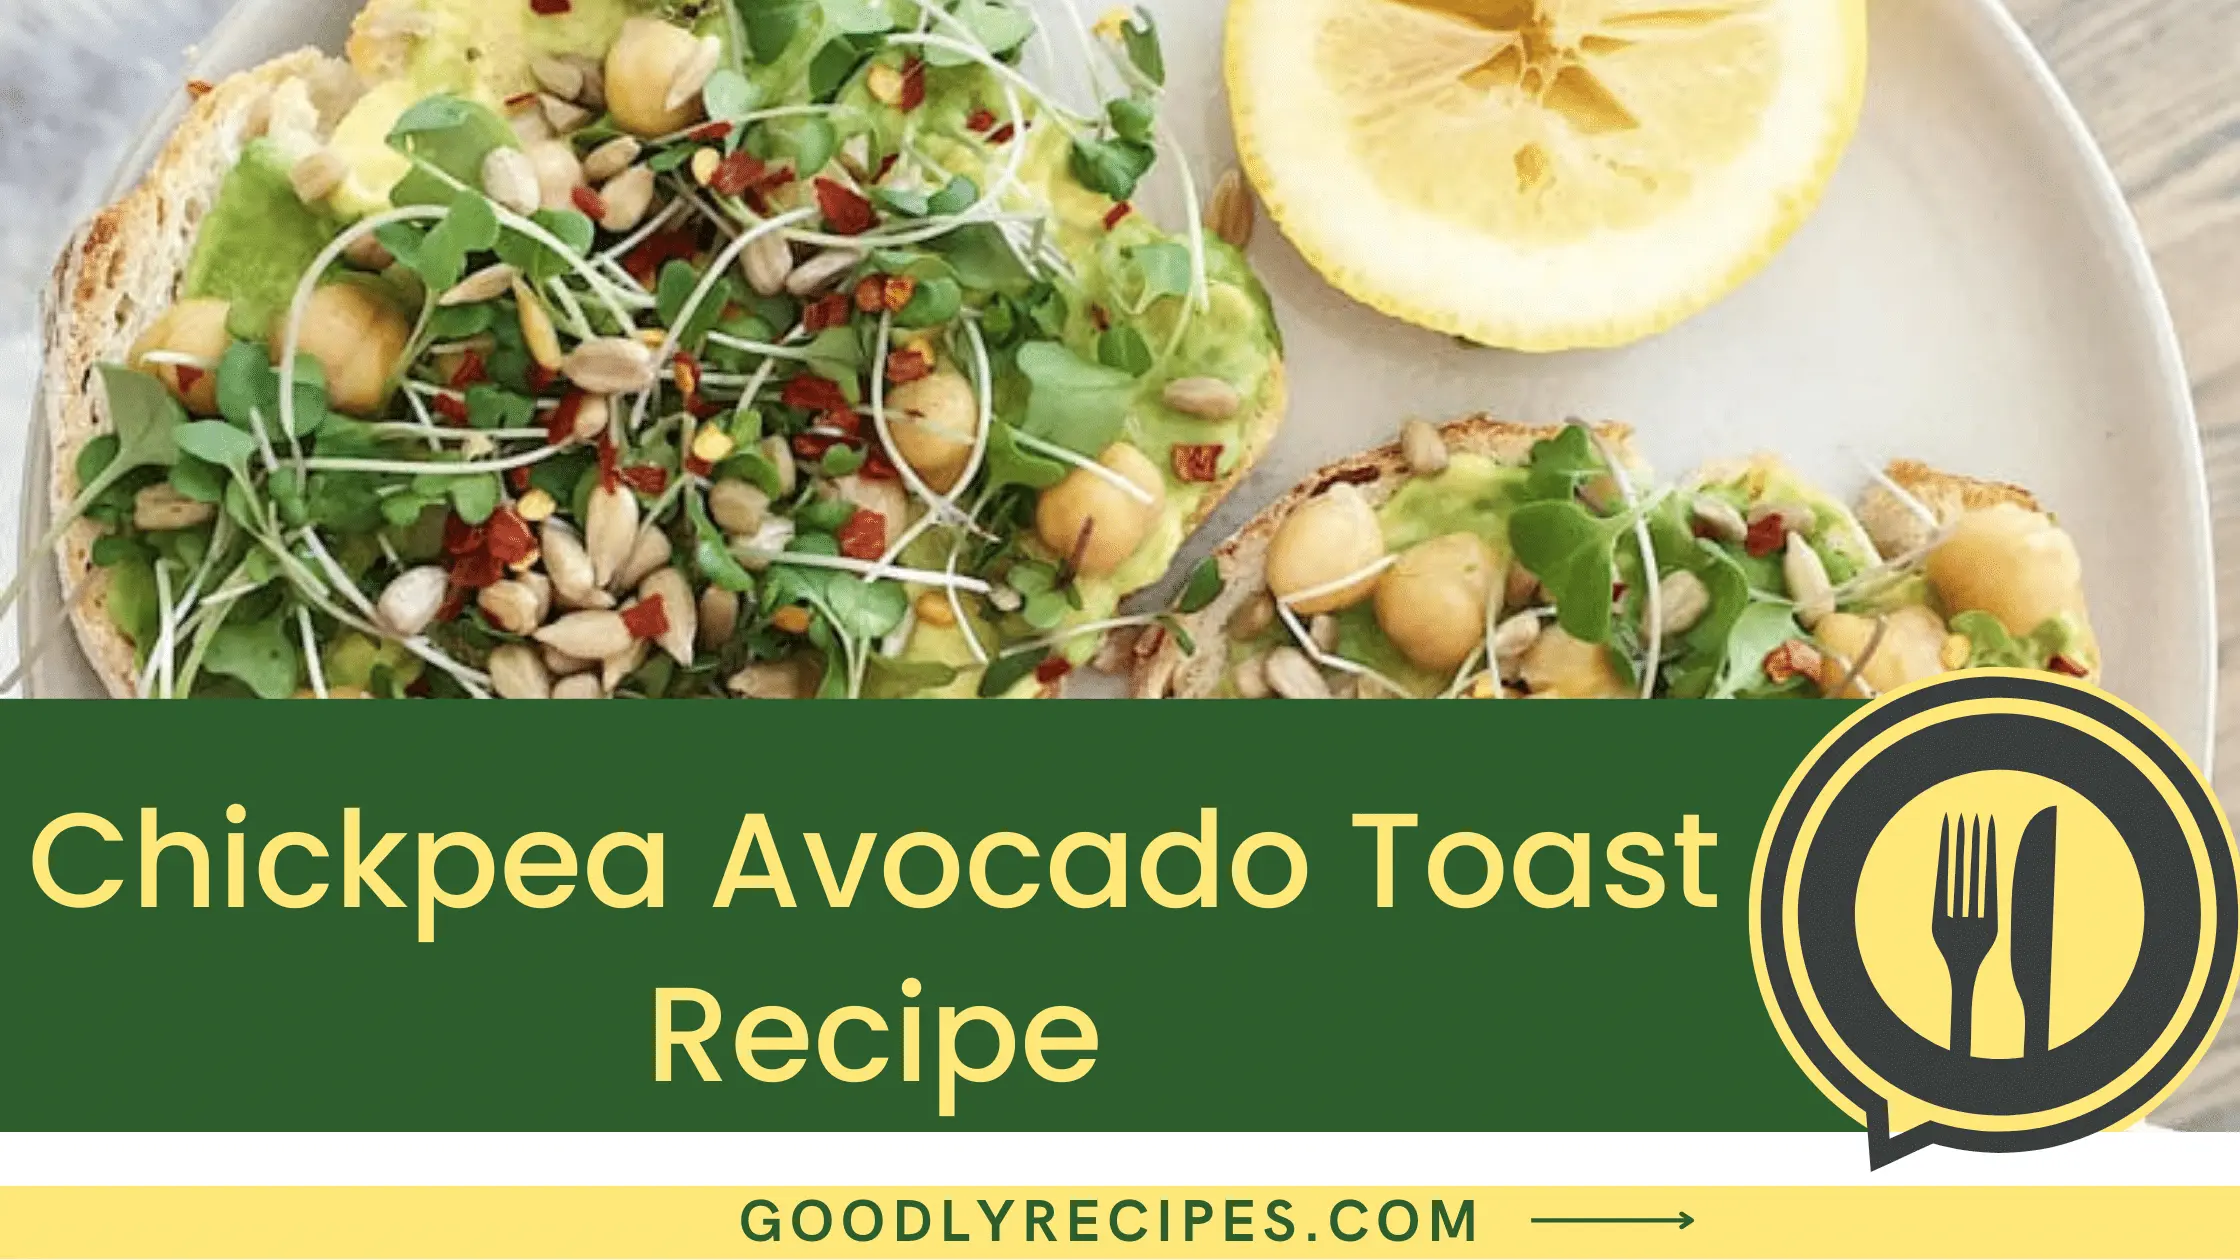 What is Chickpea Avocado Toast?